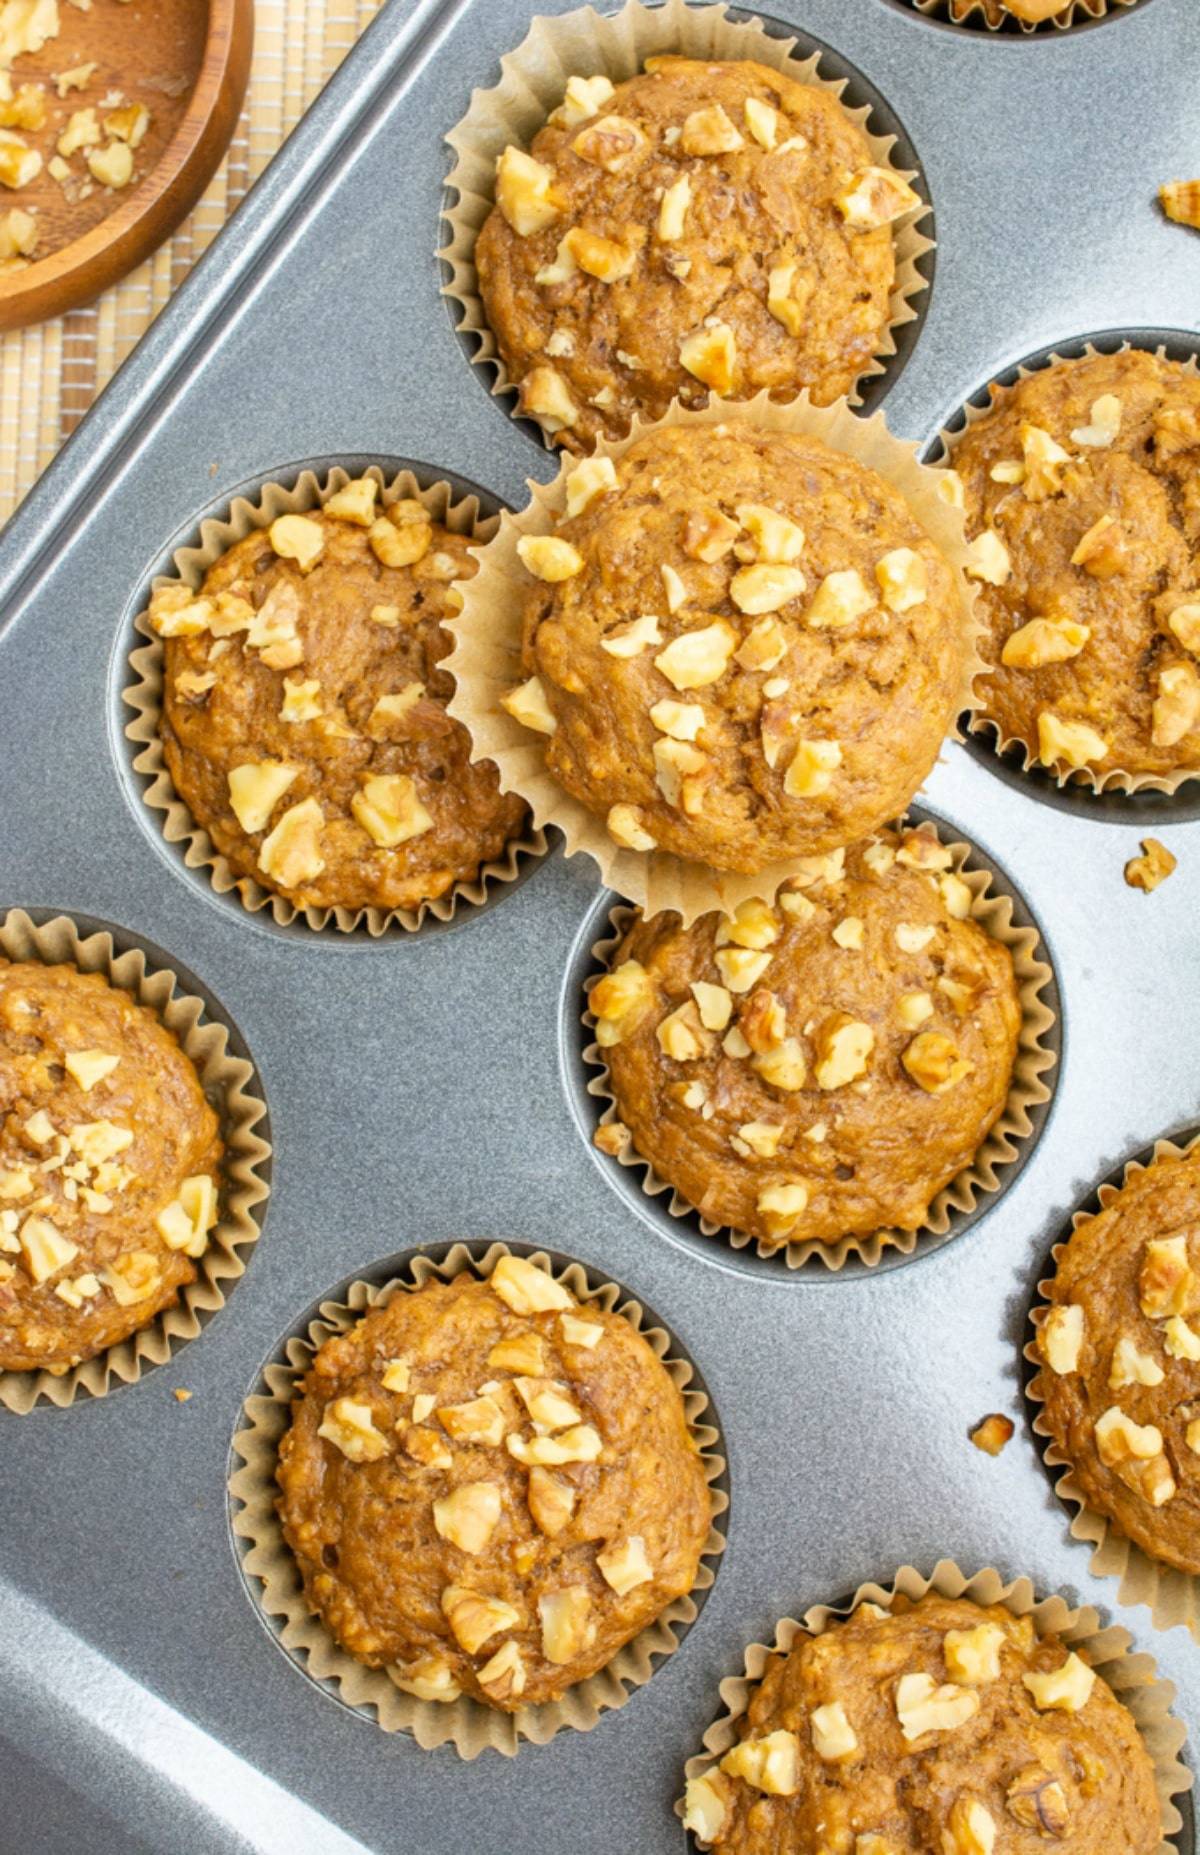 Vegan banana muffins topped with walnuts in a muffin pan.